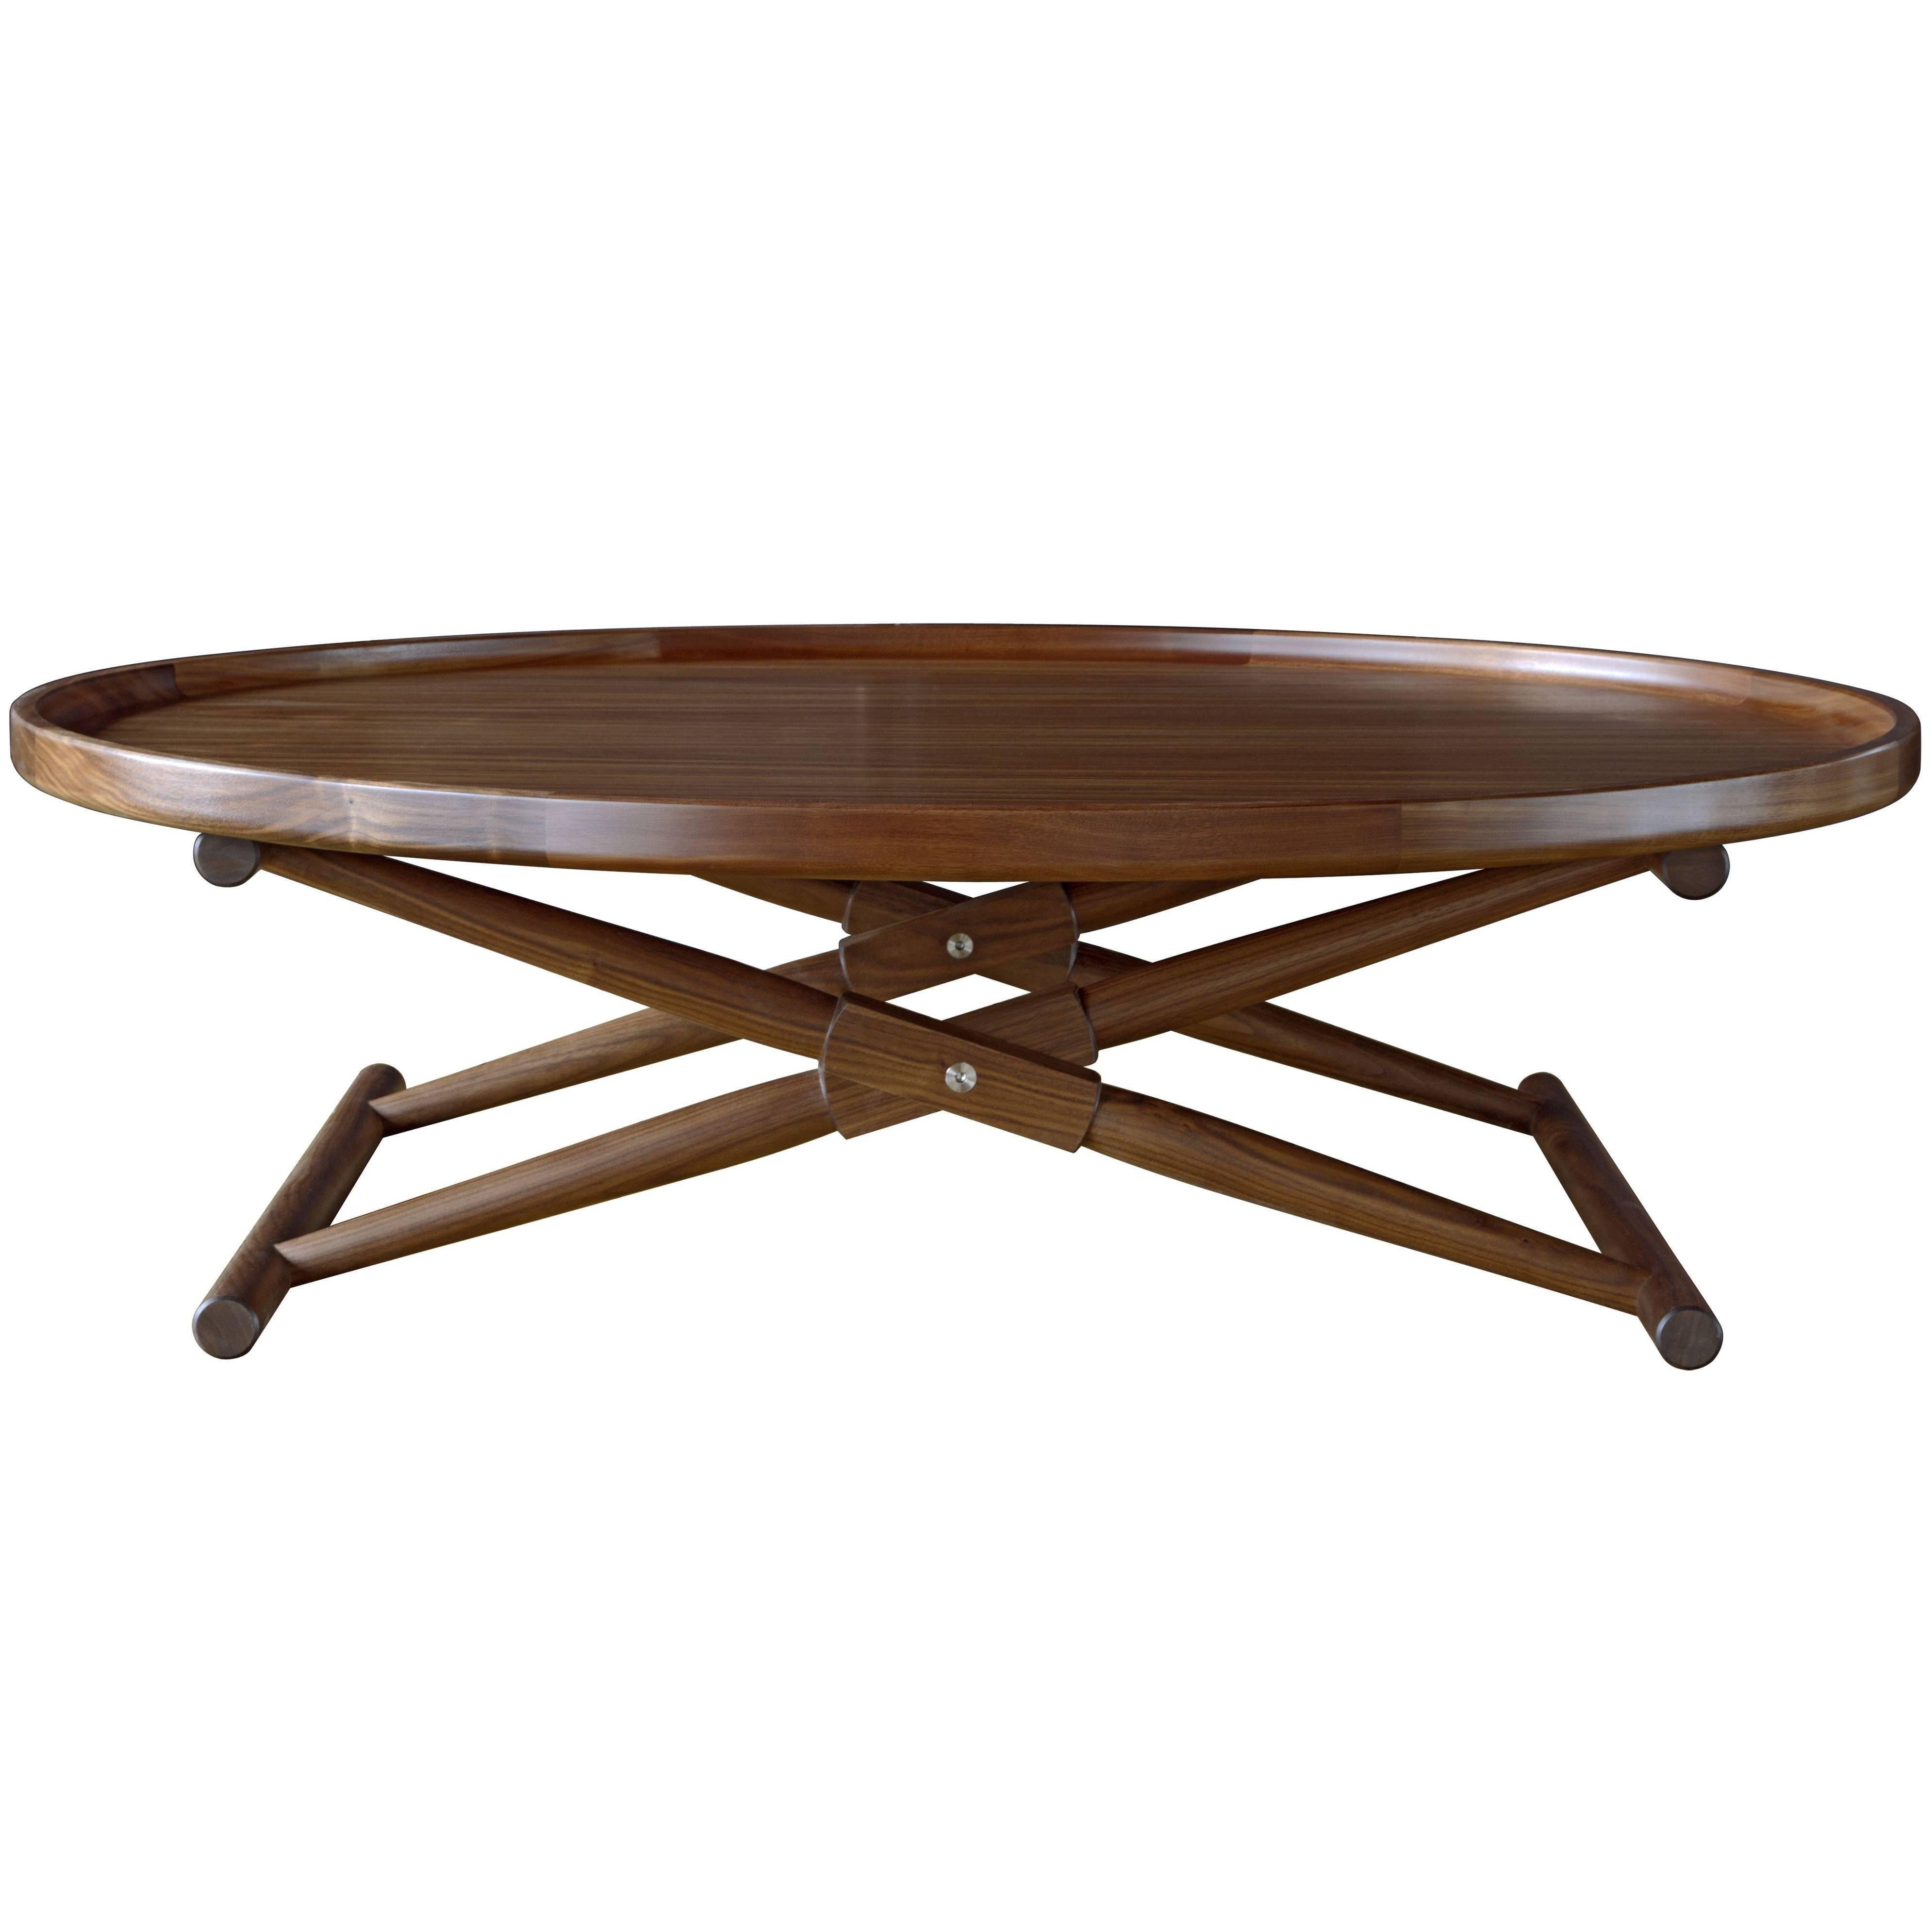 Matthiessen Coffee Table Type 3 - handcrafted by Richard Wrightman Design